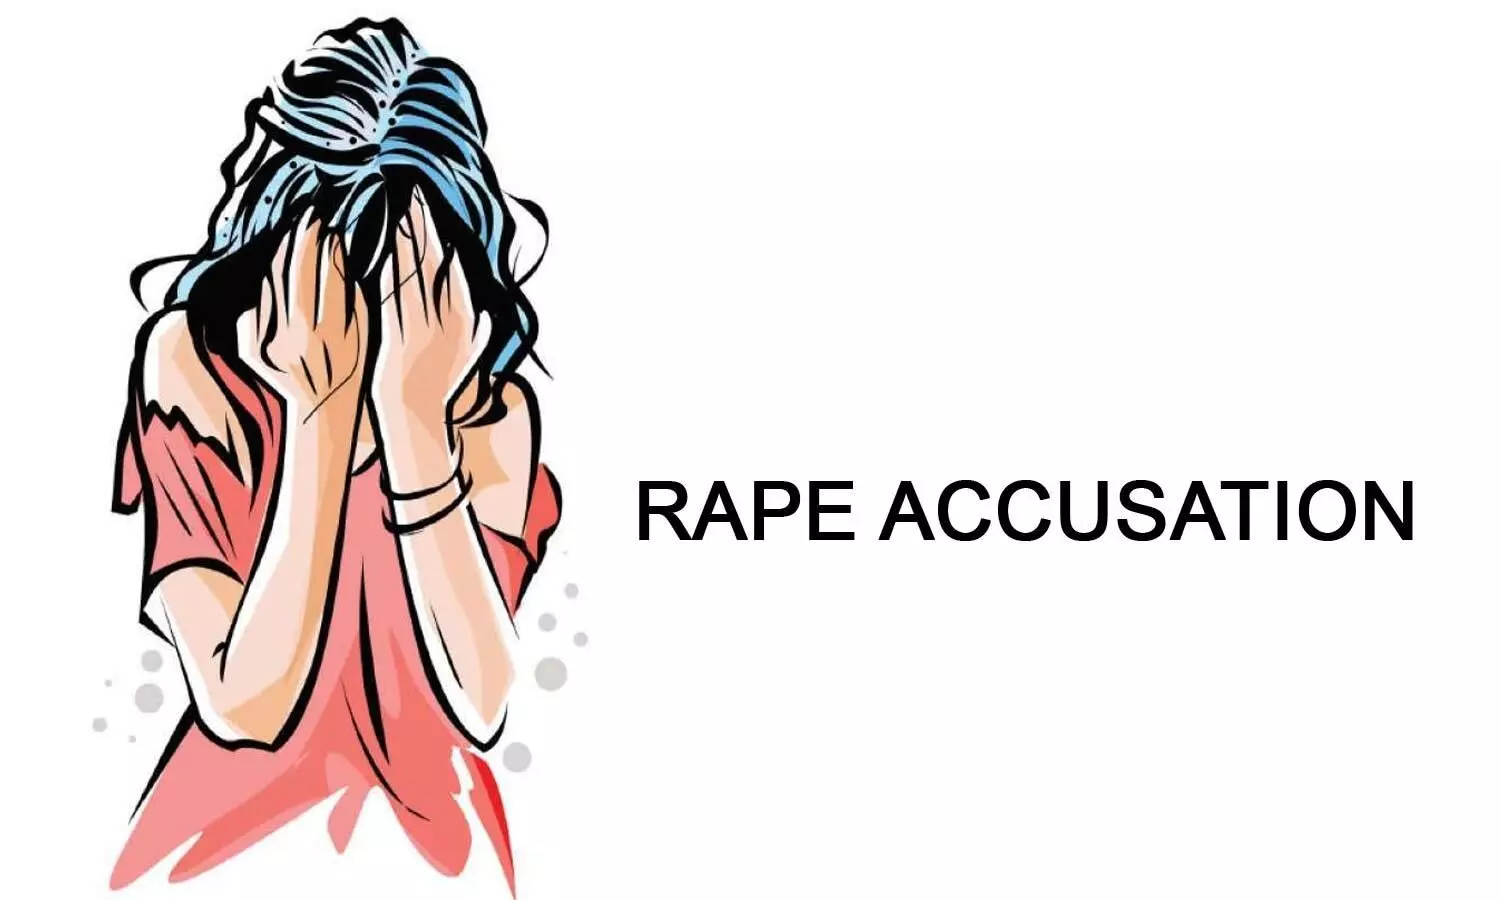 Fortis Hospital Shocker: TB patient admitted to ICU alleges rape, FIR registered